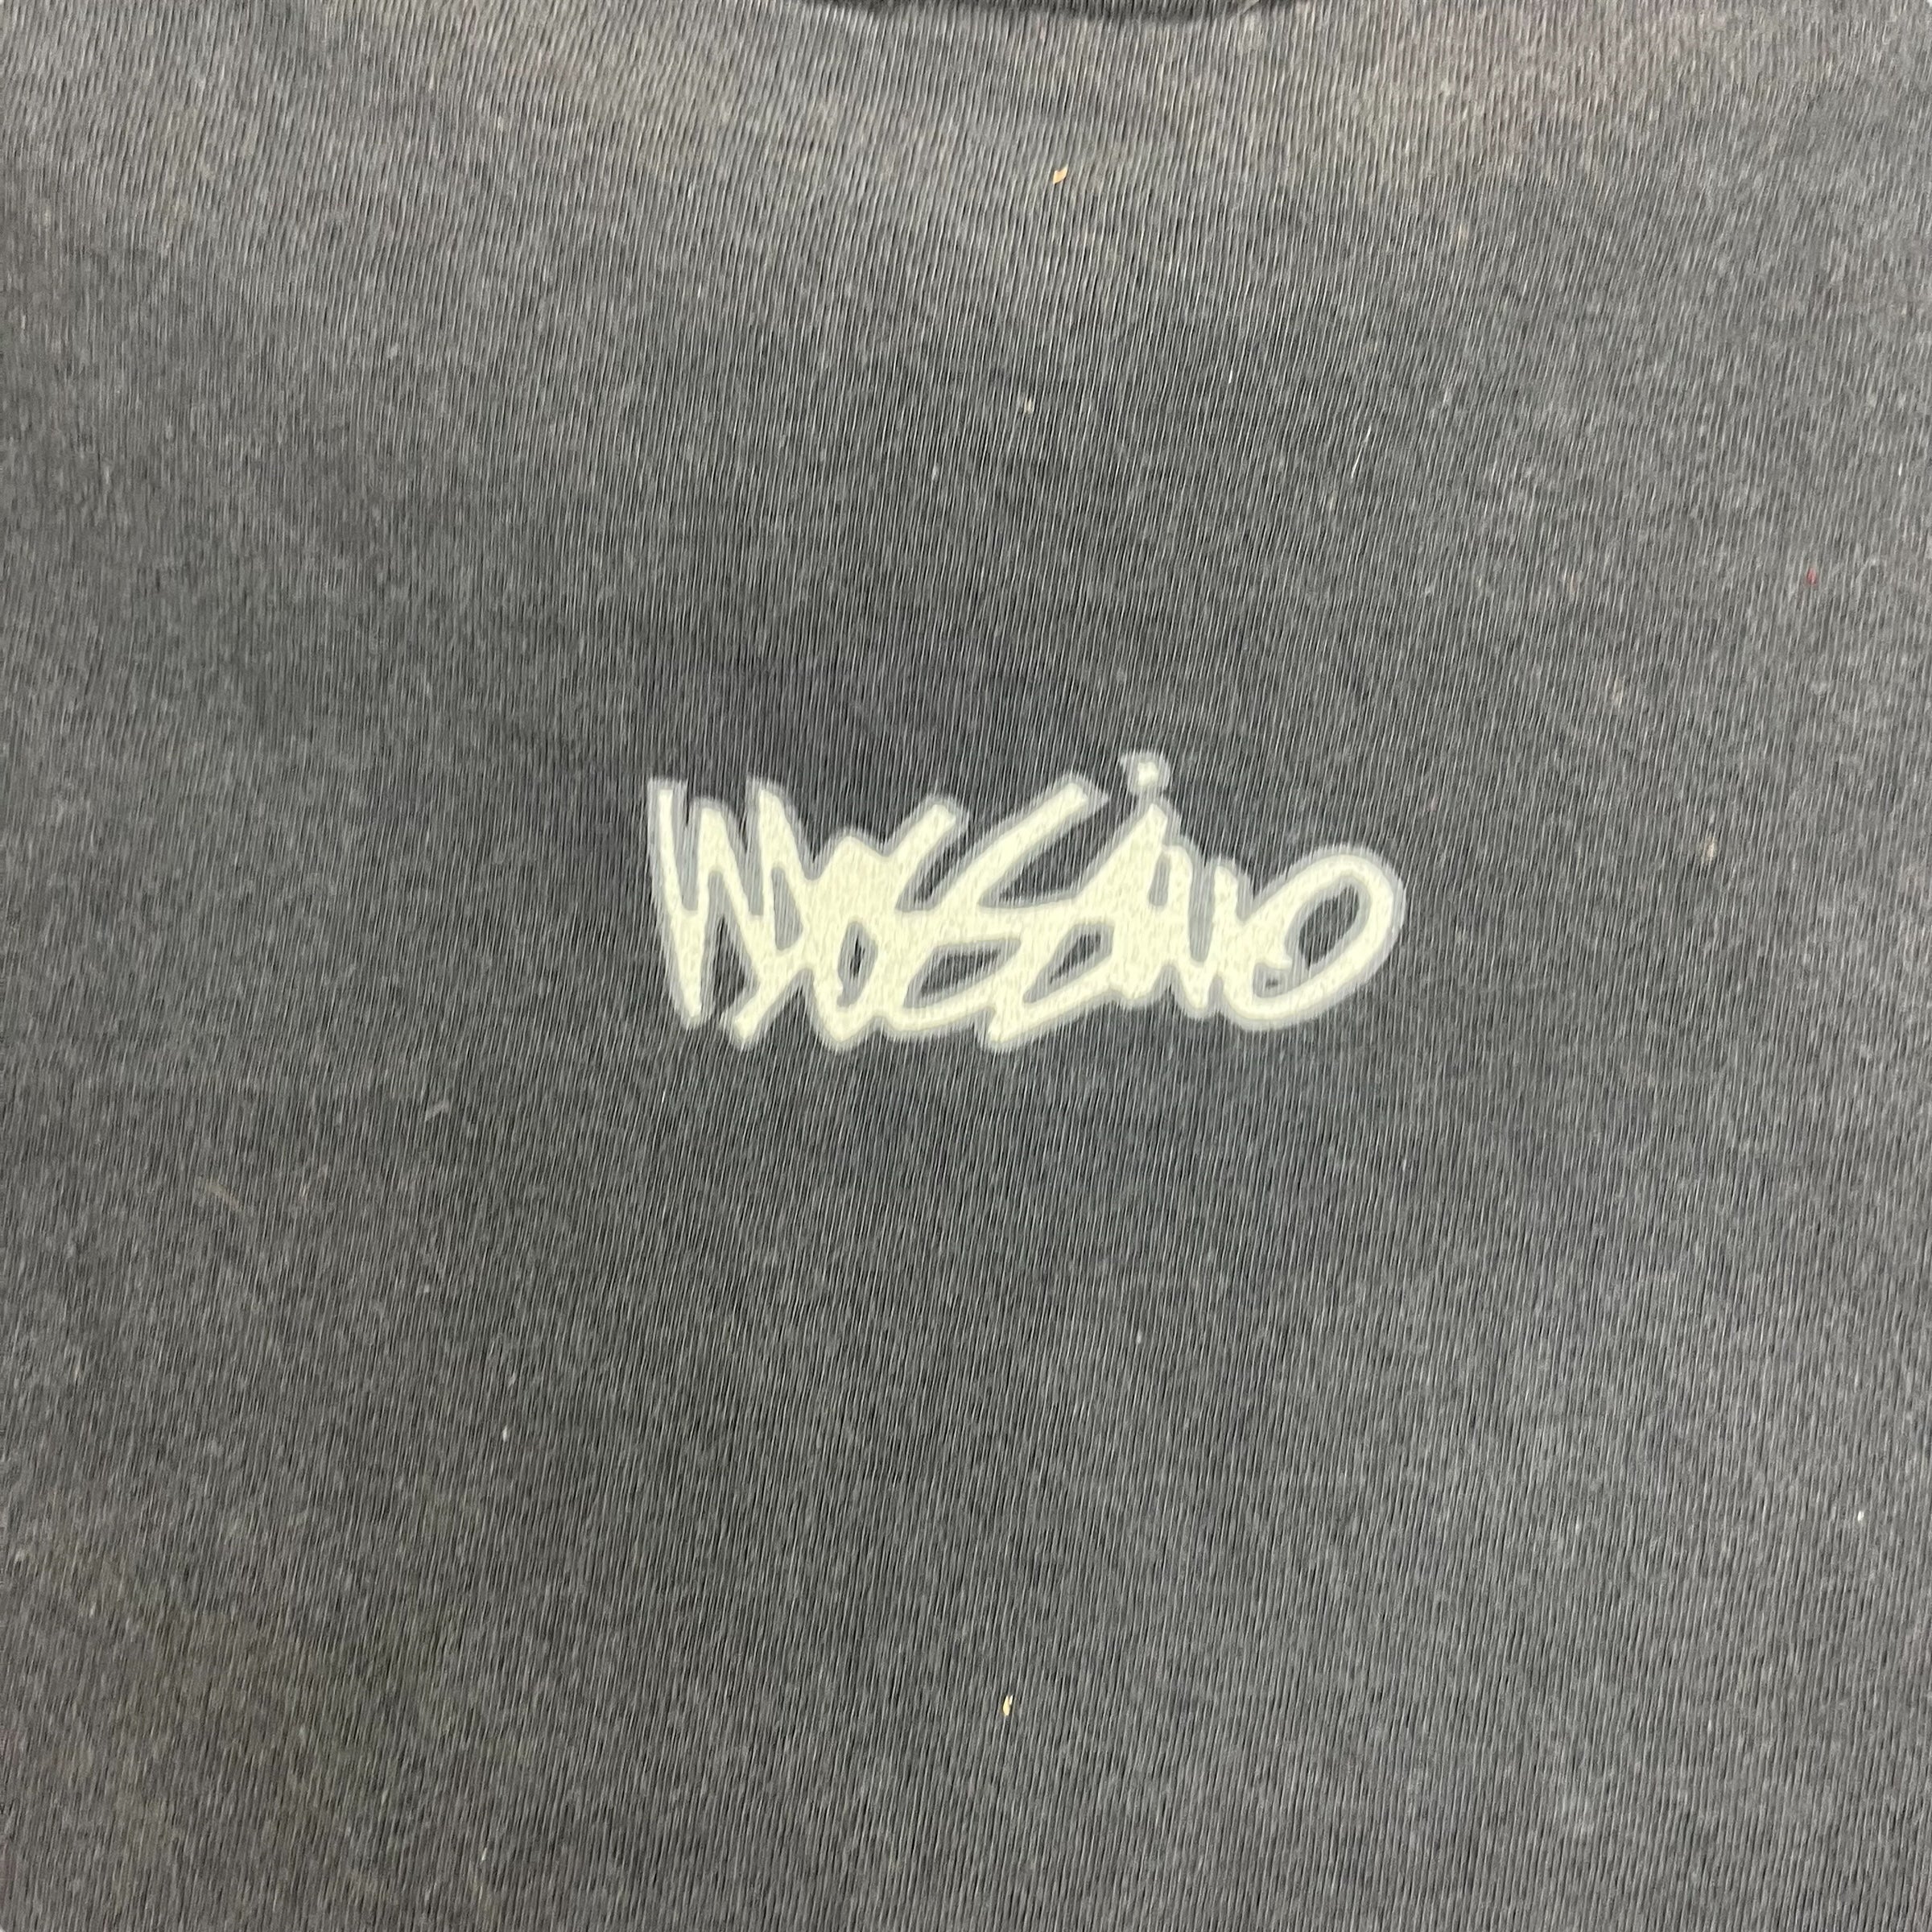 Vintage Y2K ‘Nose for The New’ Tee Black